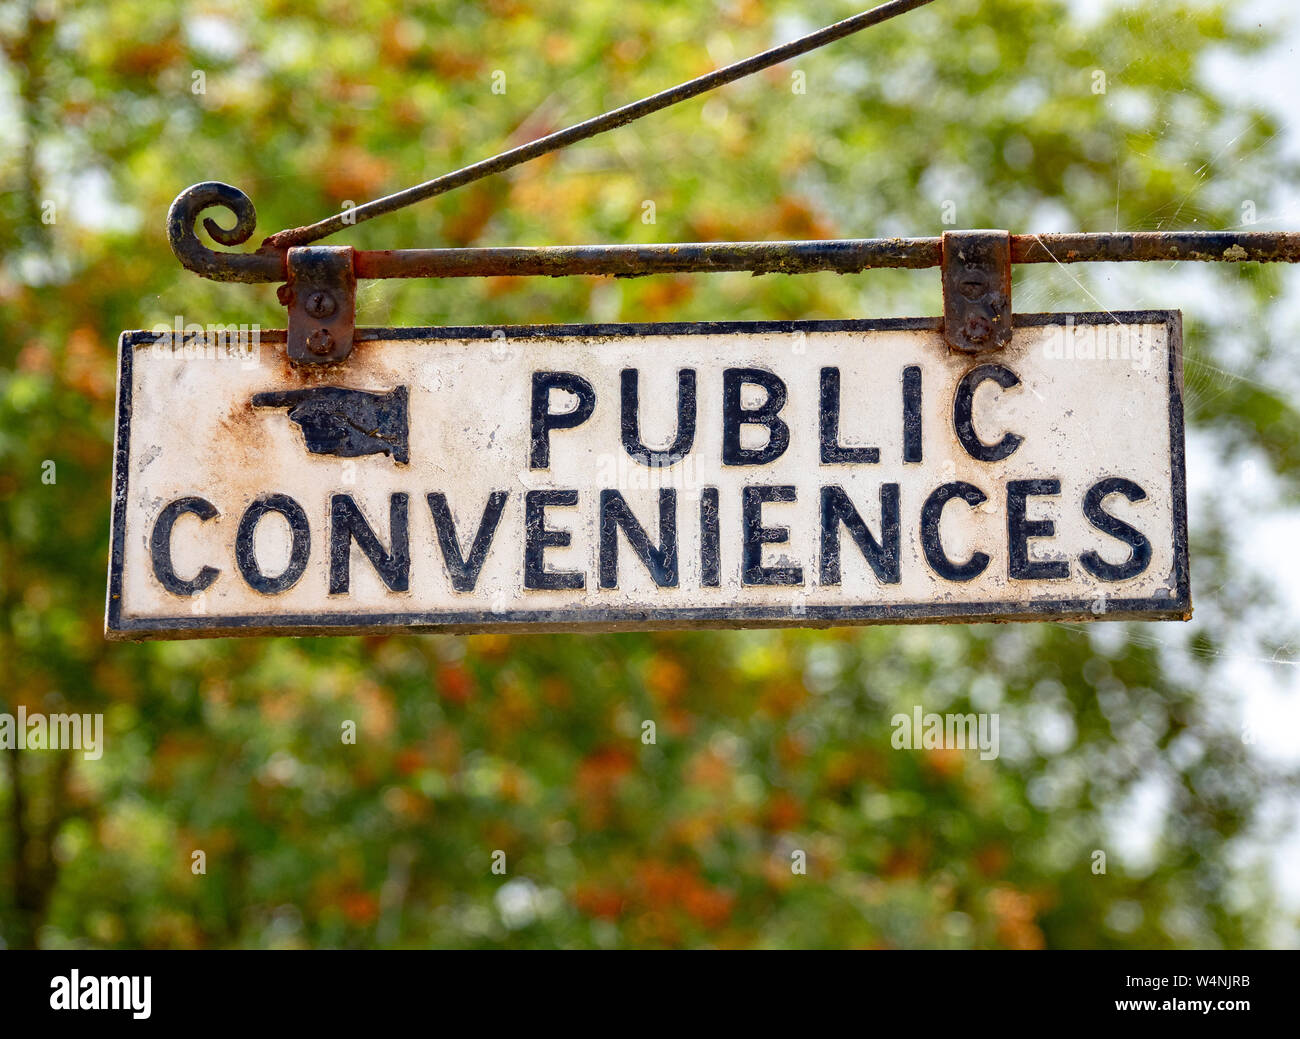 A sign for Public Conveniences in Chipping Campden, Cotswolds, Gloucestershire, England, United Kingdom, Great Britain, GB, UK. Stock Photo